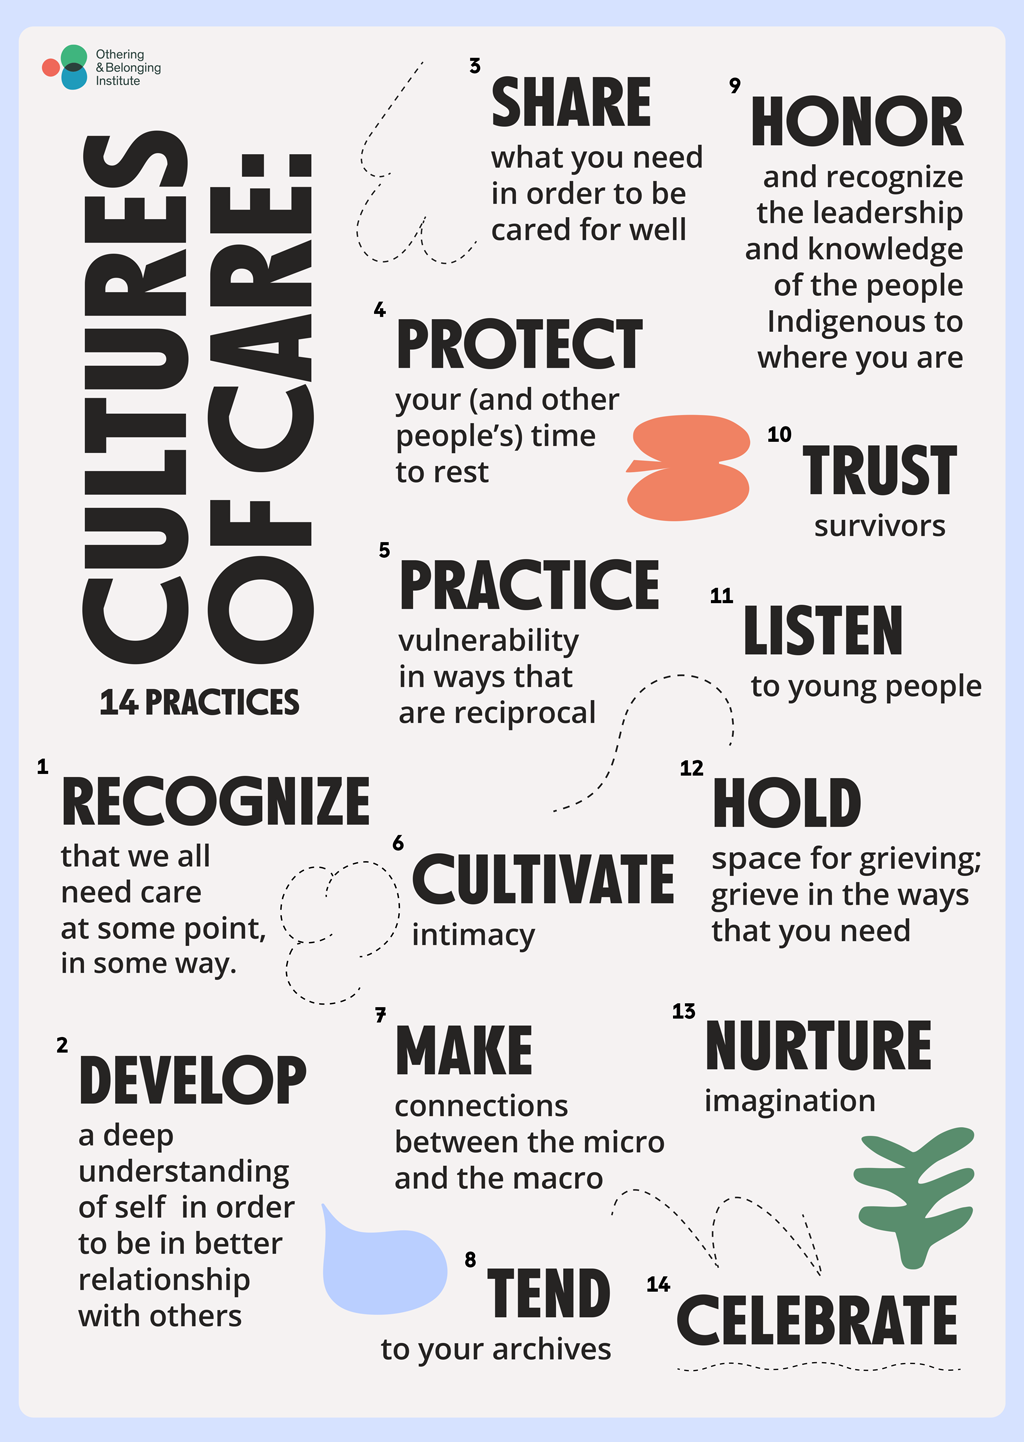 14 Practices of Cultures of Care from the Othering & Belonging Institute at UC-Berkeley: 1. Recognize that we all need care at some point, in some way 2. Develop a deep understanding of self in order to be in better relationship with others. 3. Share what you need in order to be cared for well. 4. Protect your (and other people's) time to rest 5. Practice vulnerability in ways that are reciprocal. 6. Cultivate intimacy. 7. Make connections between the micro and the macro. 8. Tend to your arhives. 9. Honor and recognize the leadership and knowledge of the people Indigenous to where you are. 10. Trust survivors. 11. Listen to you people. 12. Hold space for grieving; grieve in the ways that you need. 13. Nurture imagination. 14. Celebrate.